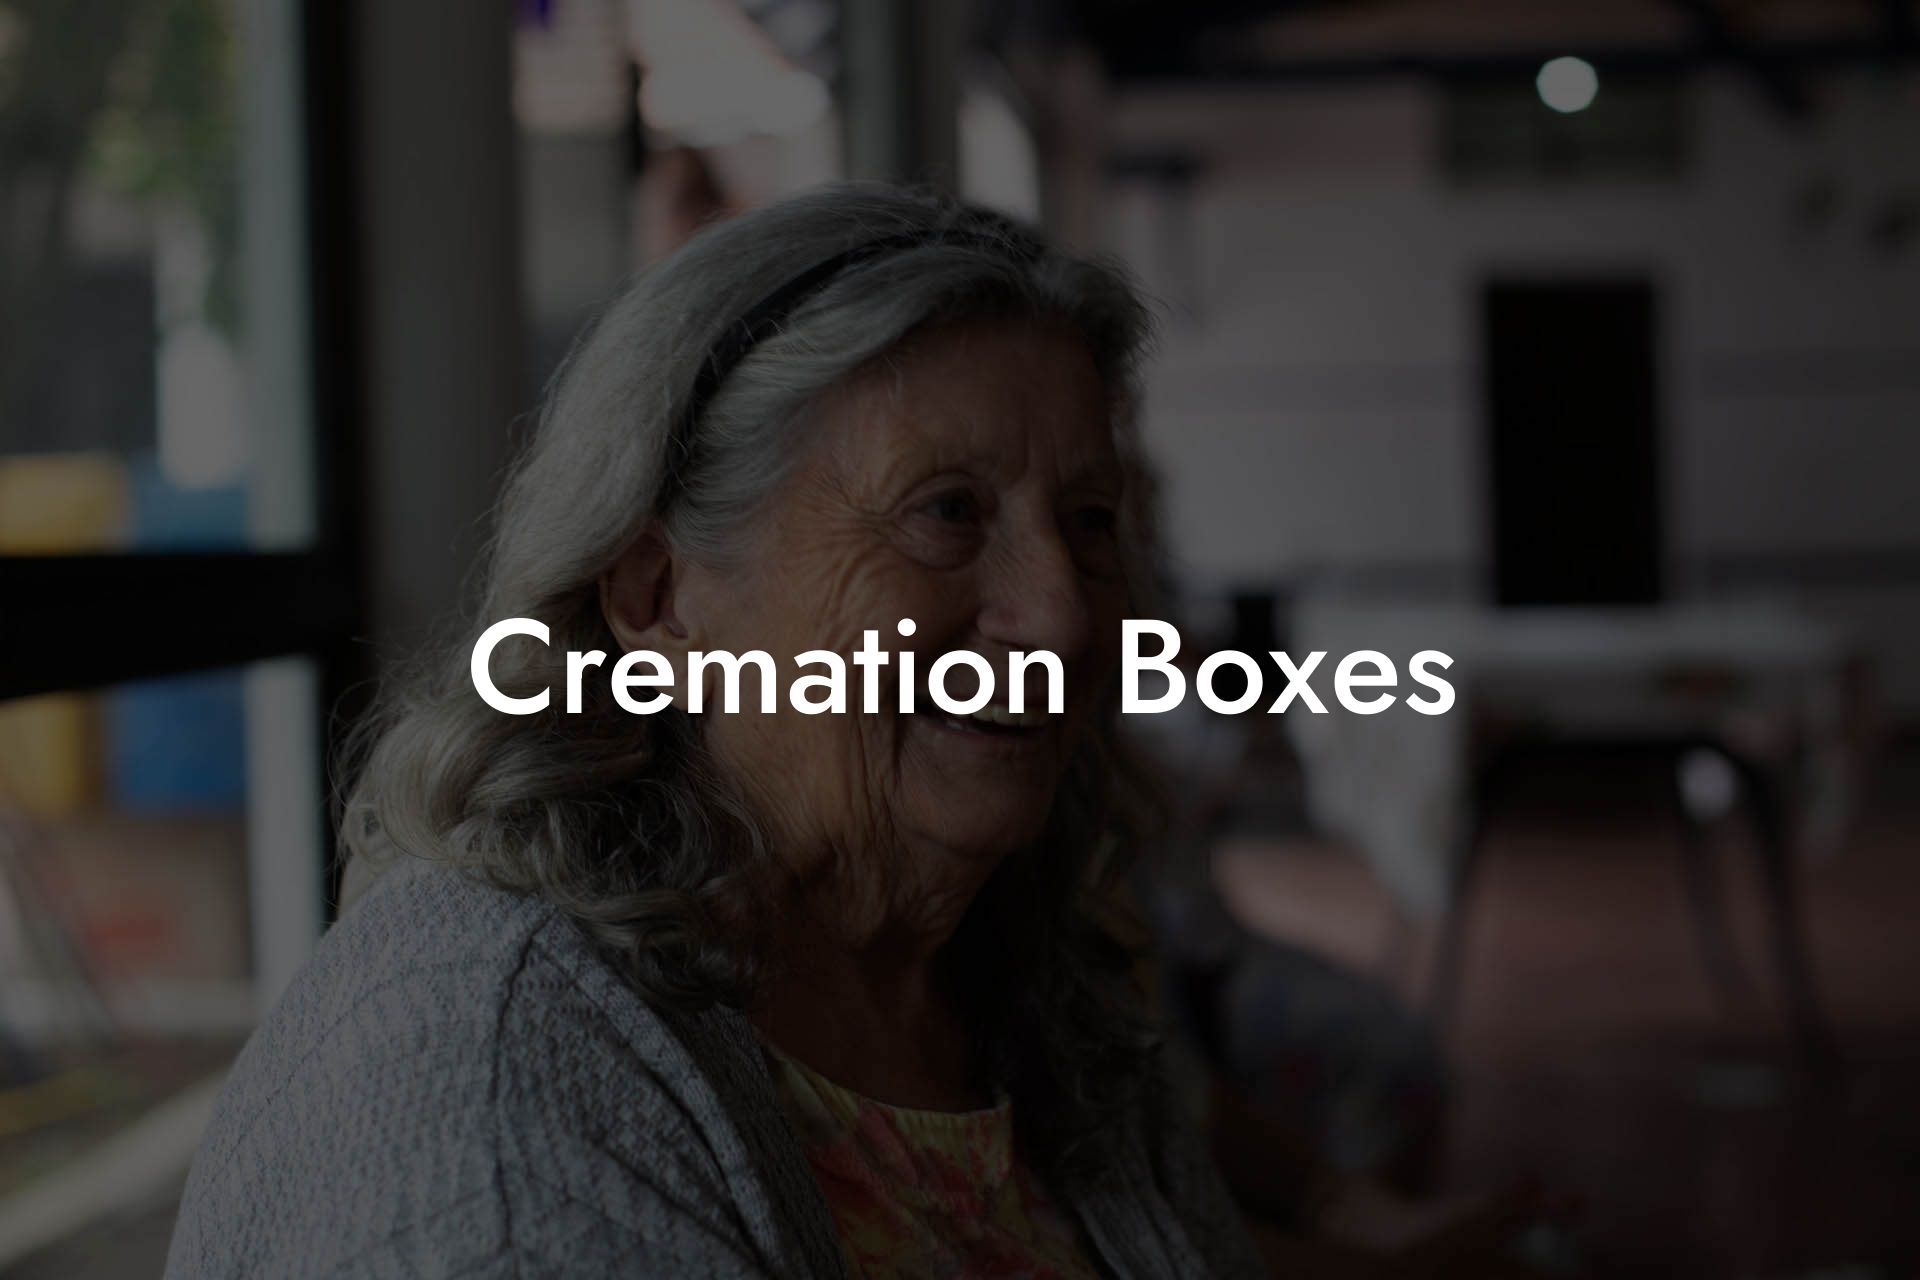 Cremation Boxes